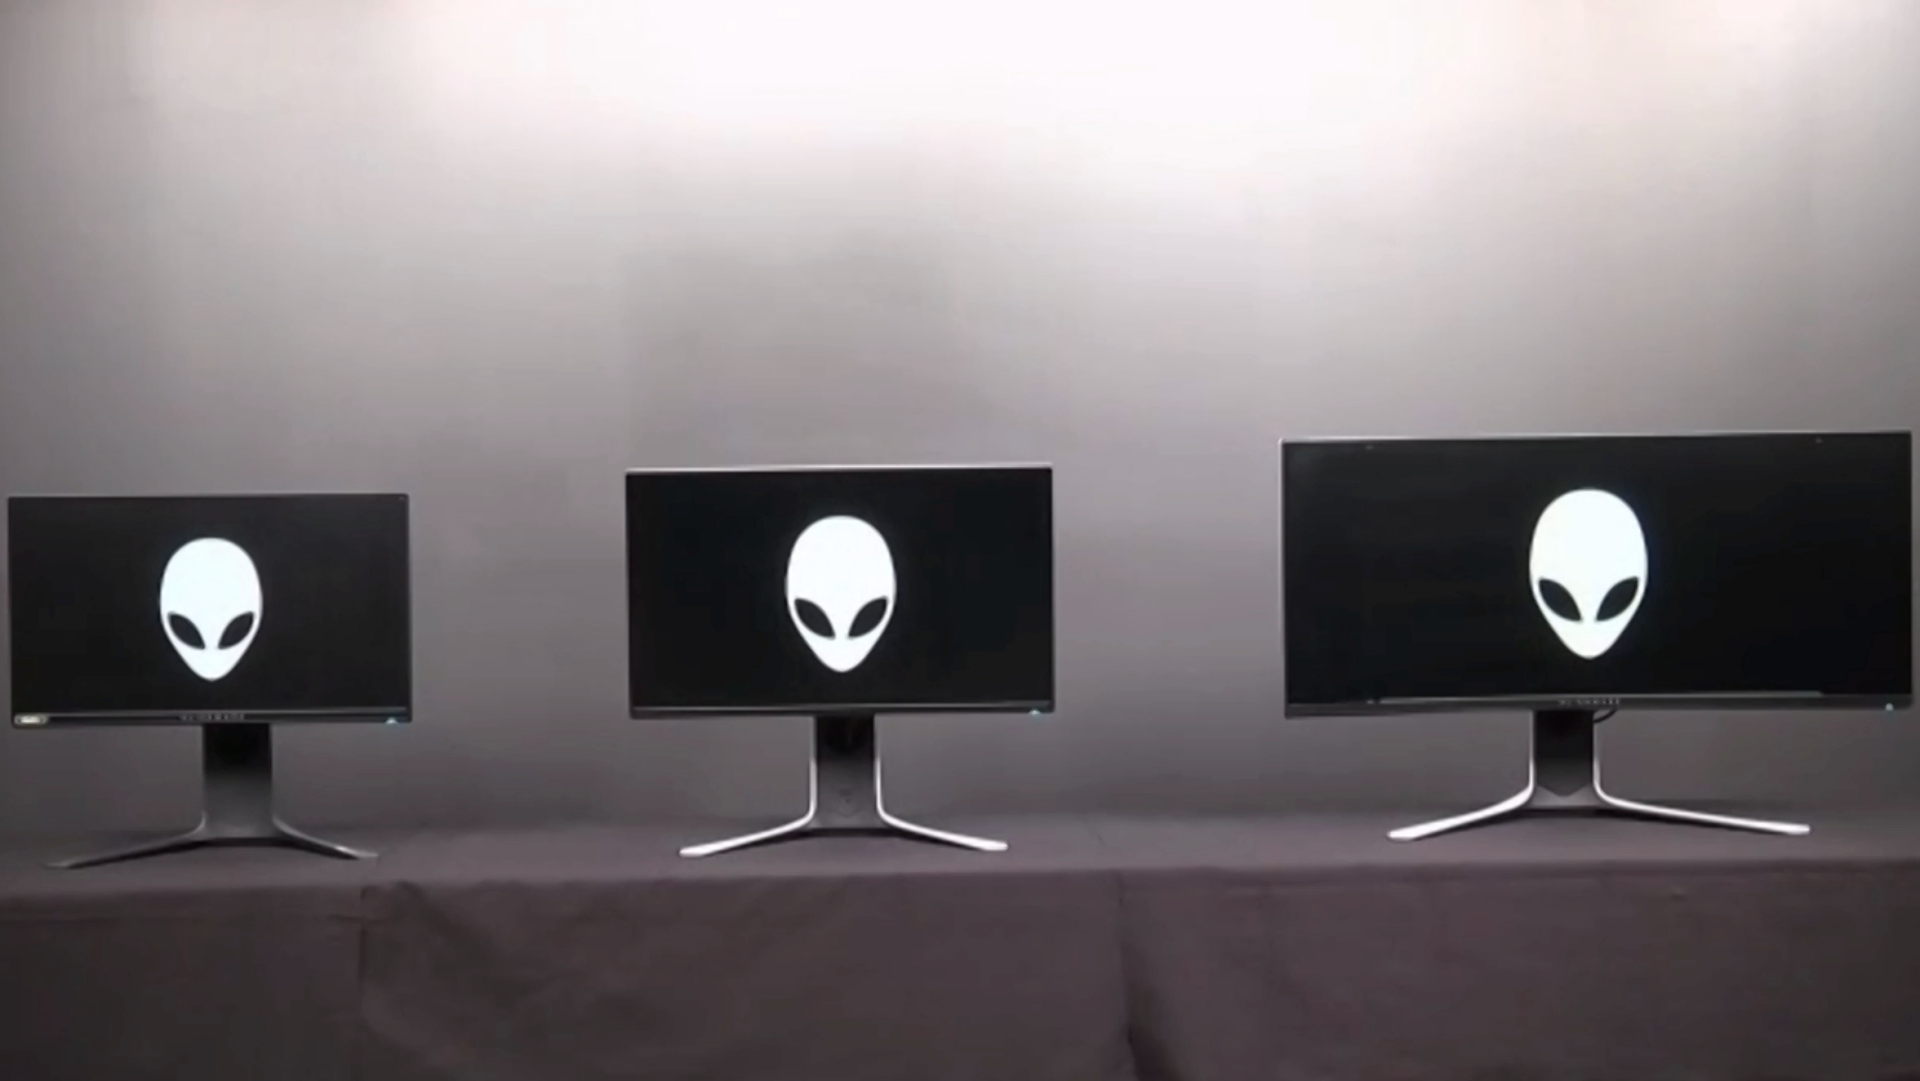 DELL ALIENWARE AW2521H 360Hz モニター